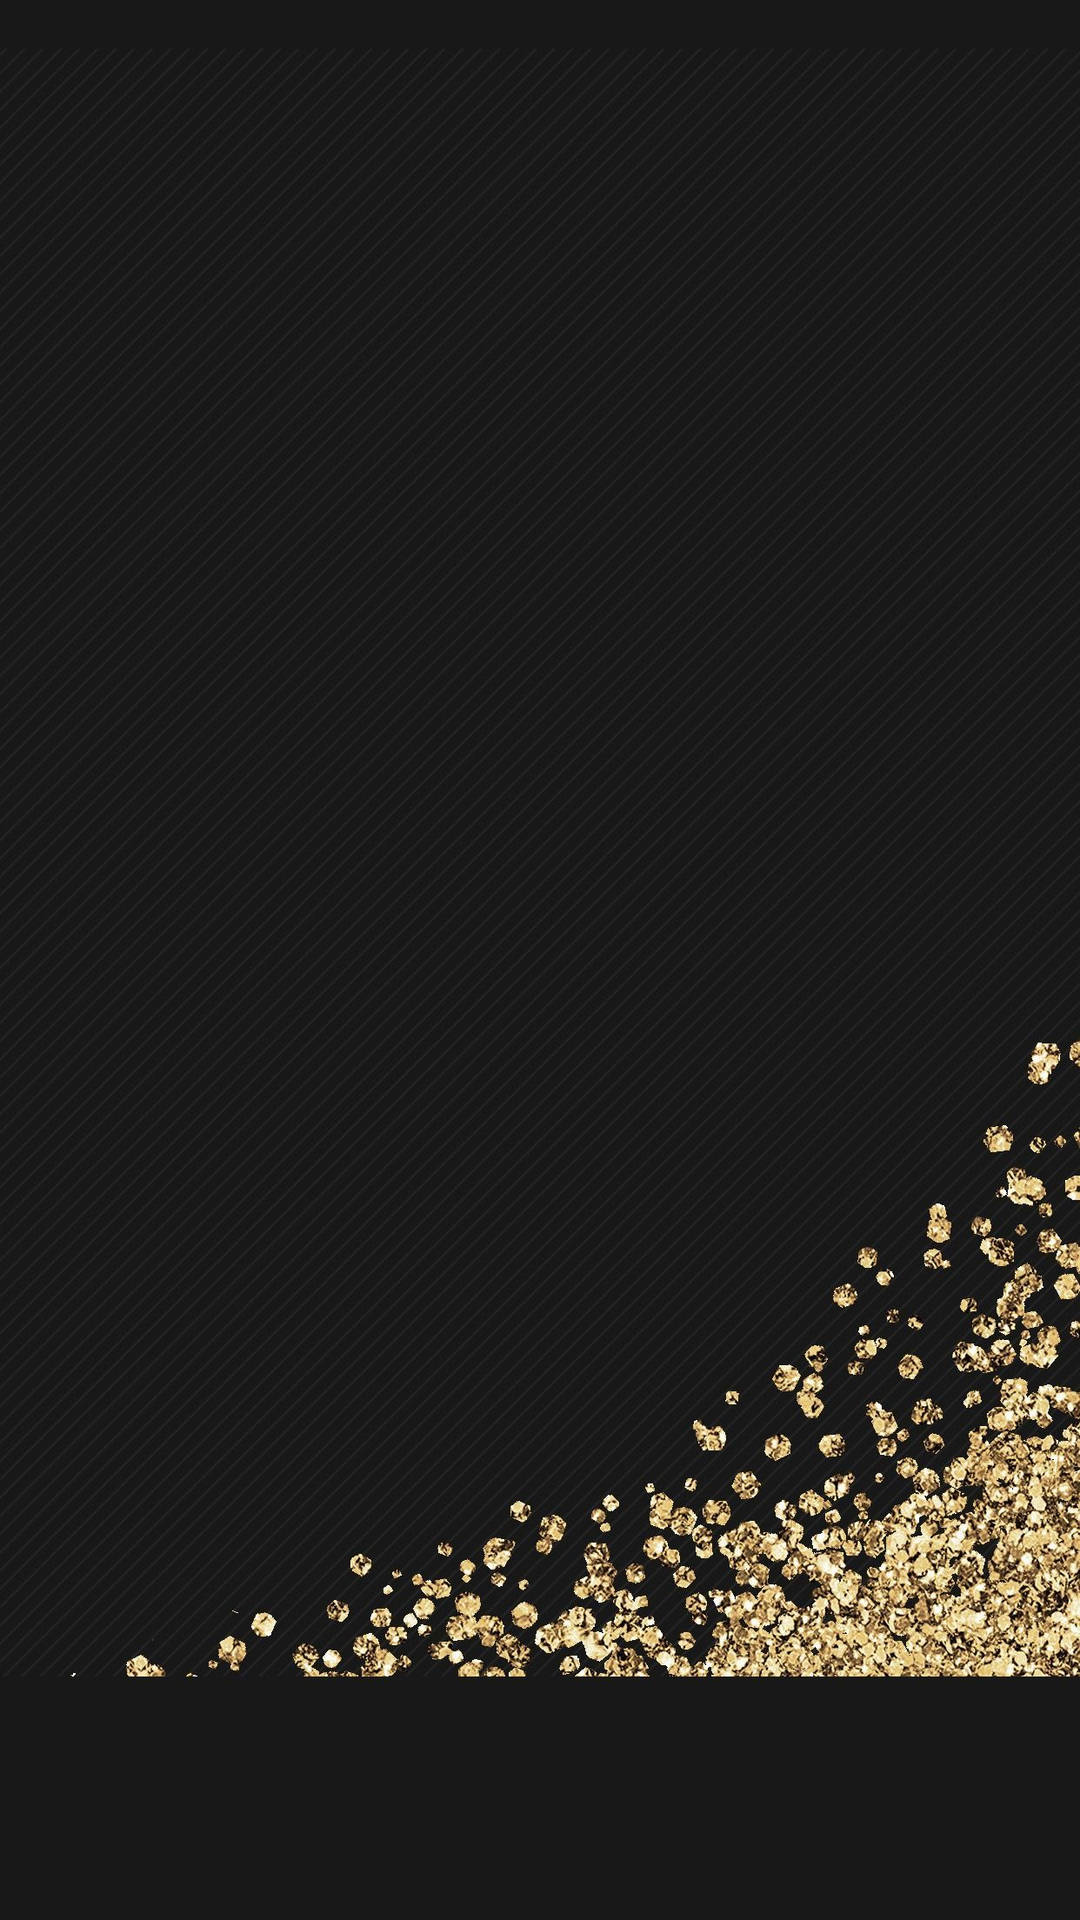 Black Android And Gold Glitters Background